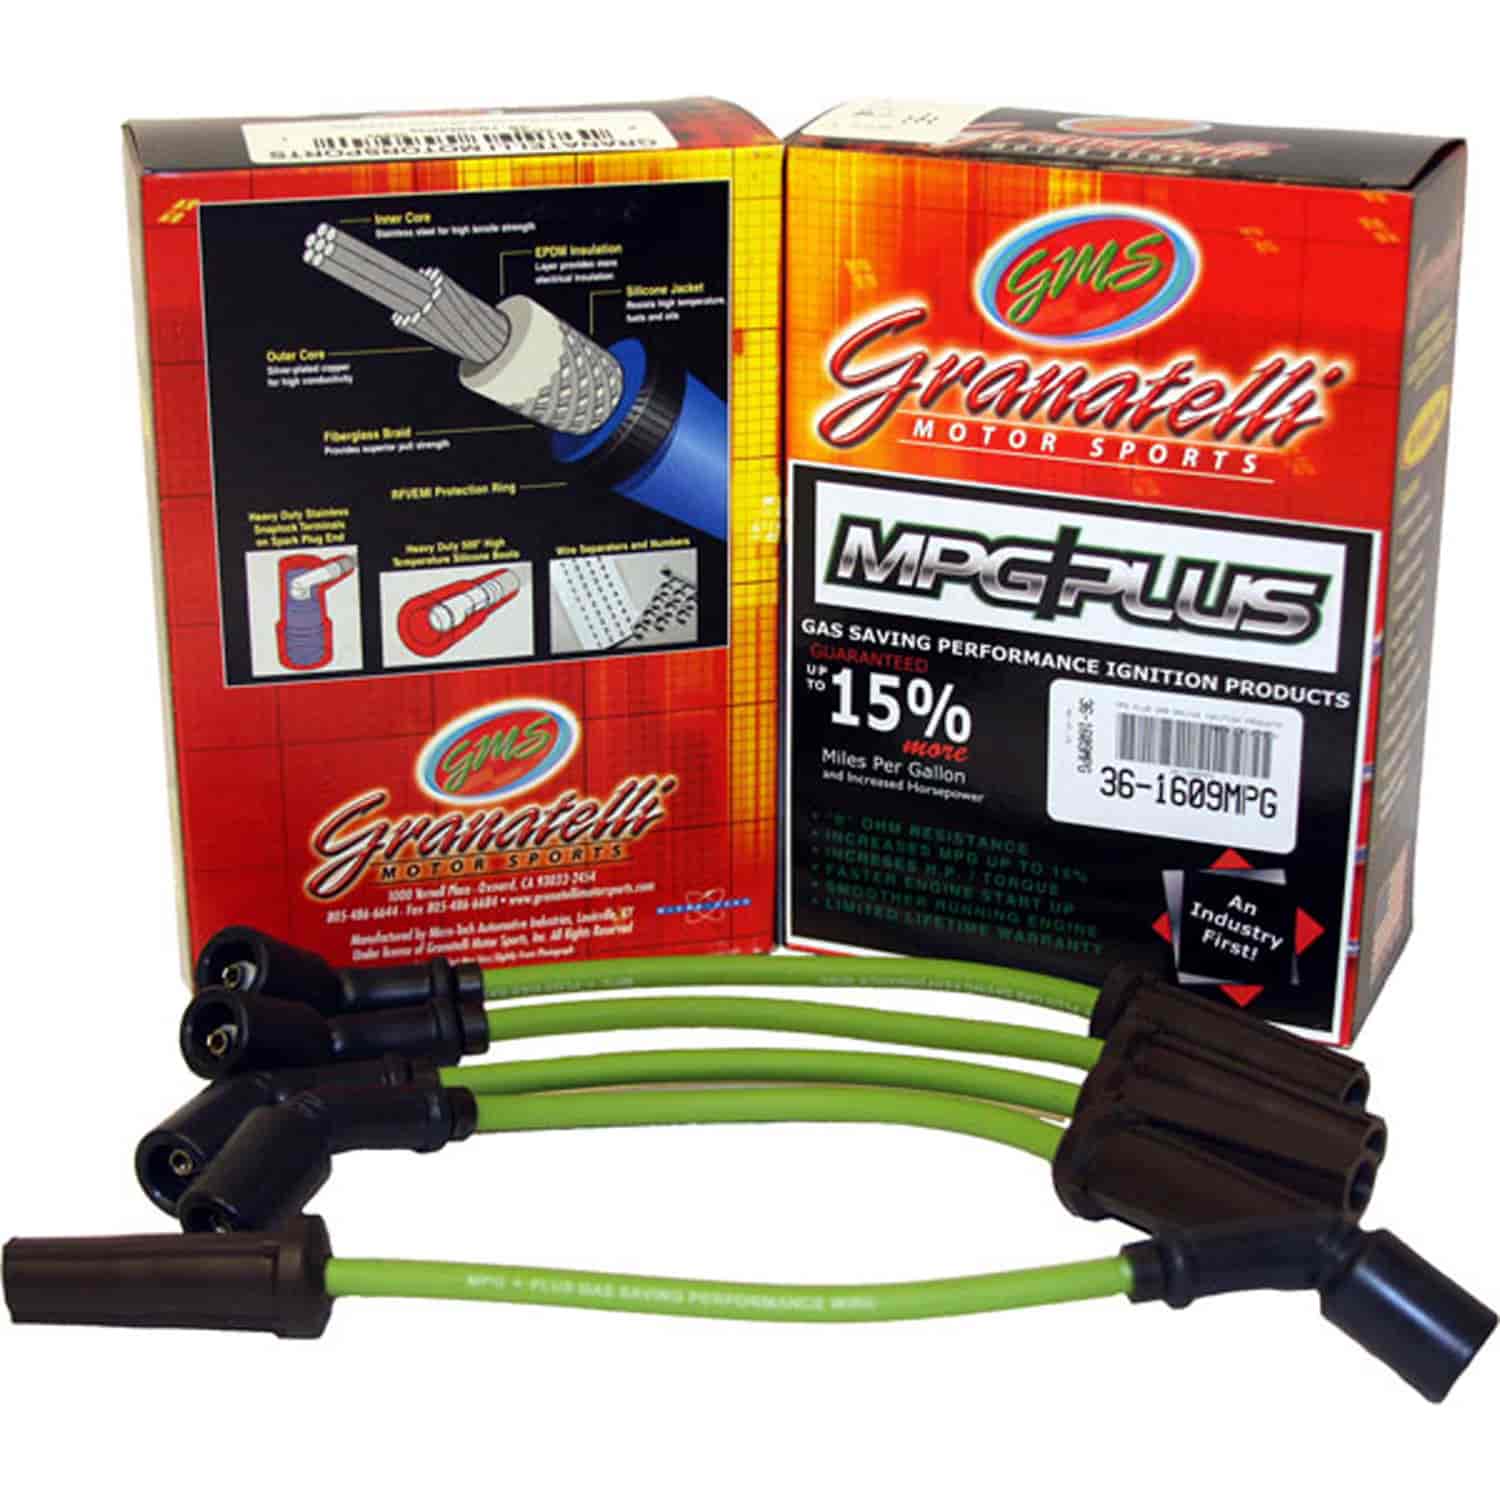 MPG Wires TOYOTA TERCEL 4CYL 1.5L 80-82